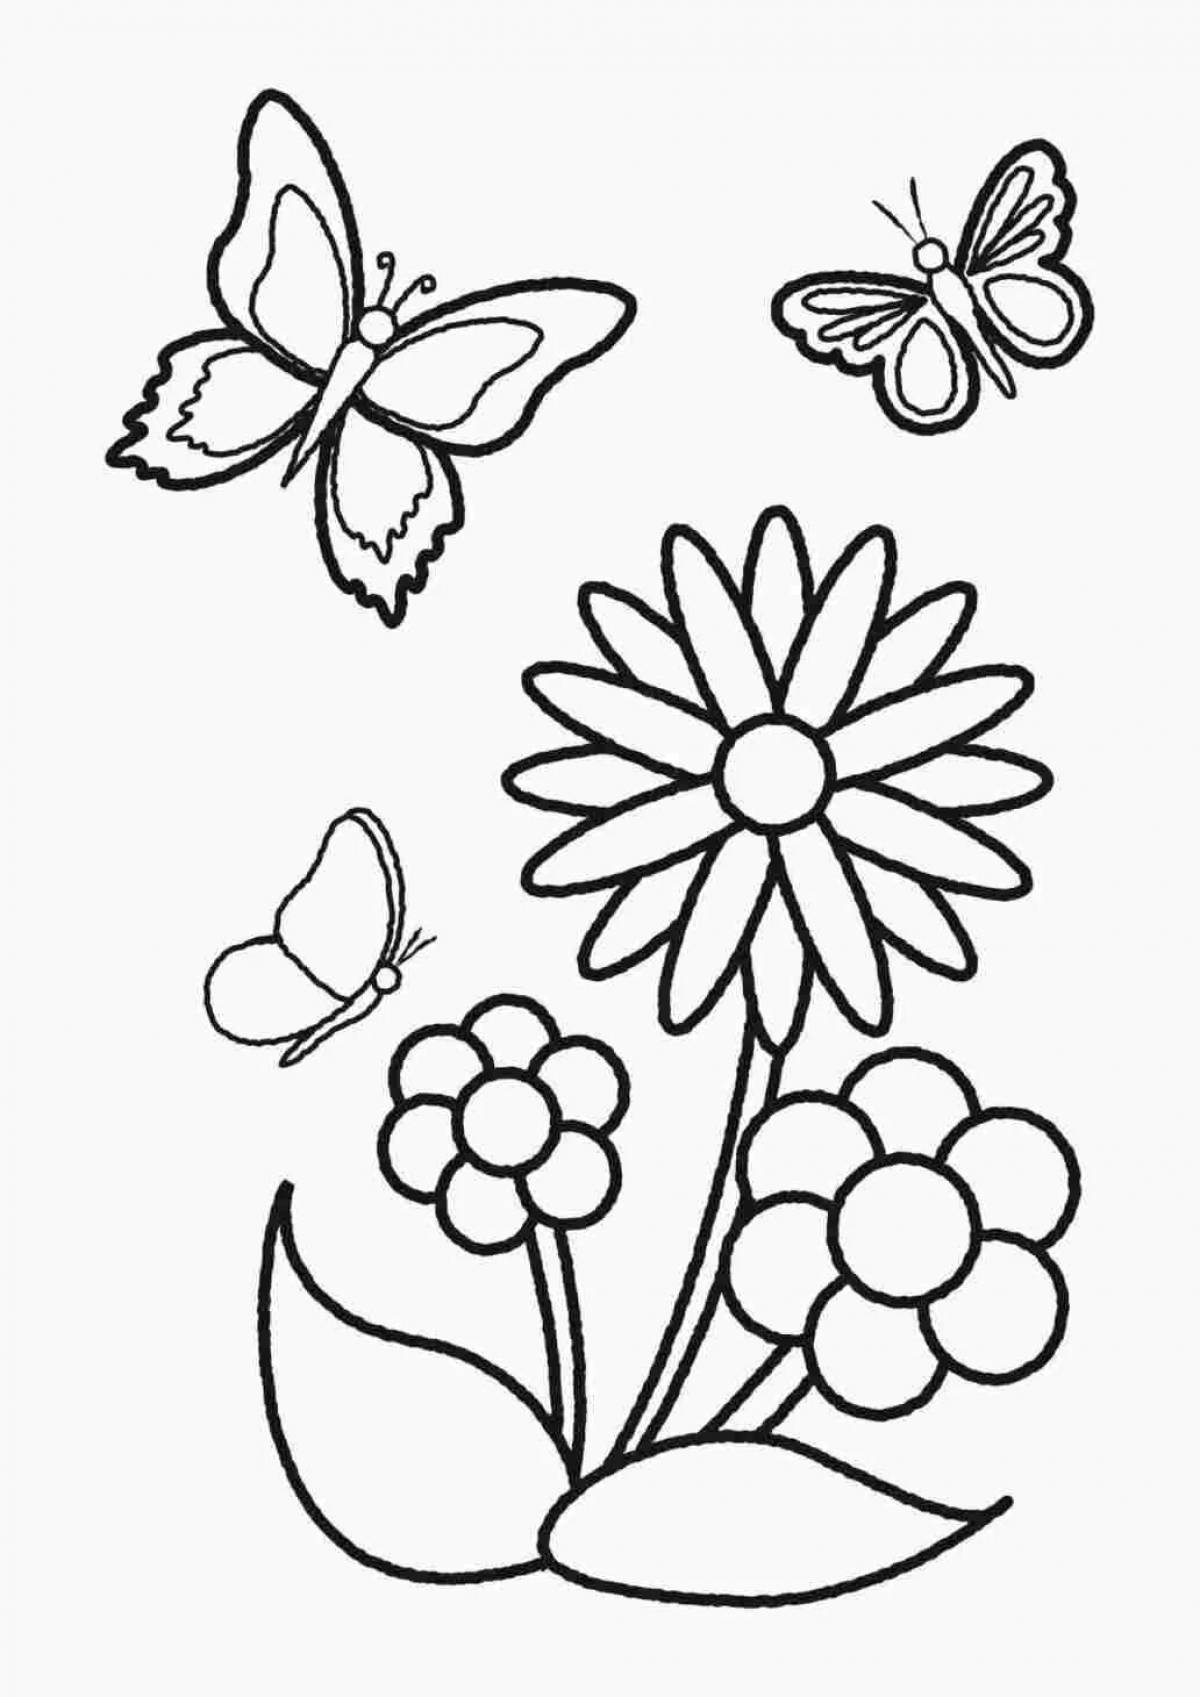 Whimsical flower coloring book for 5-6 year olds